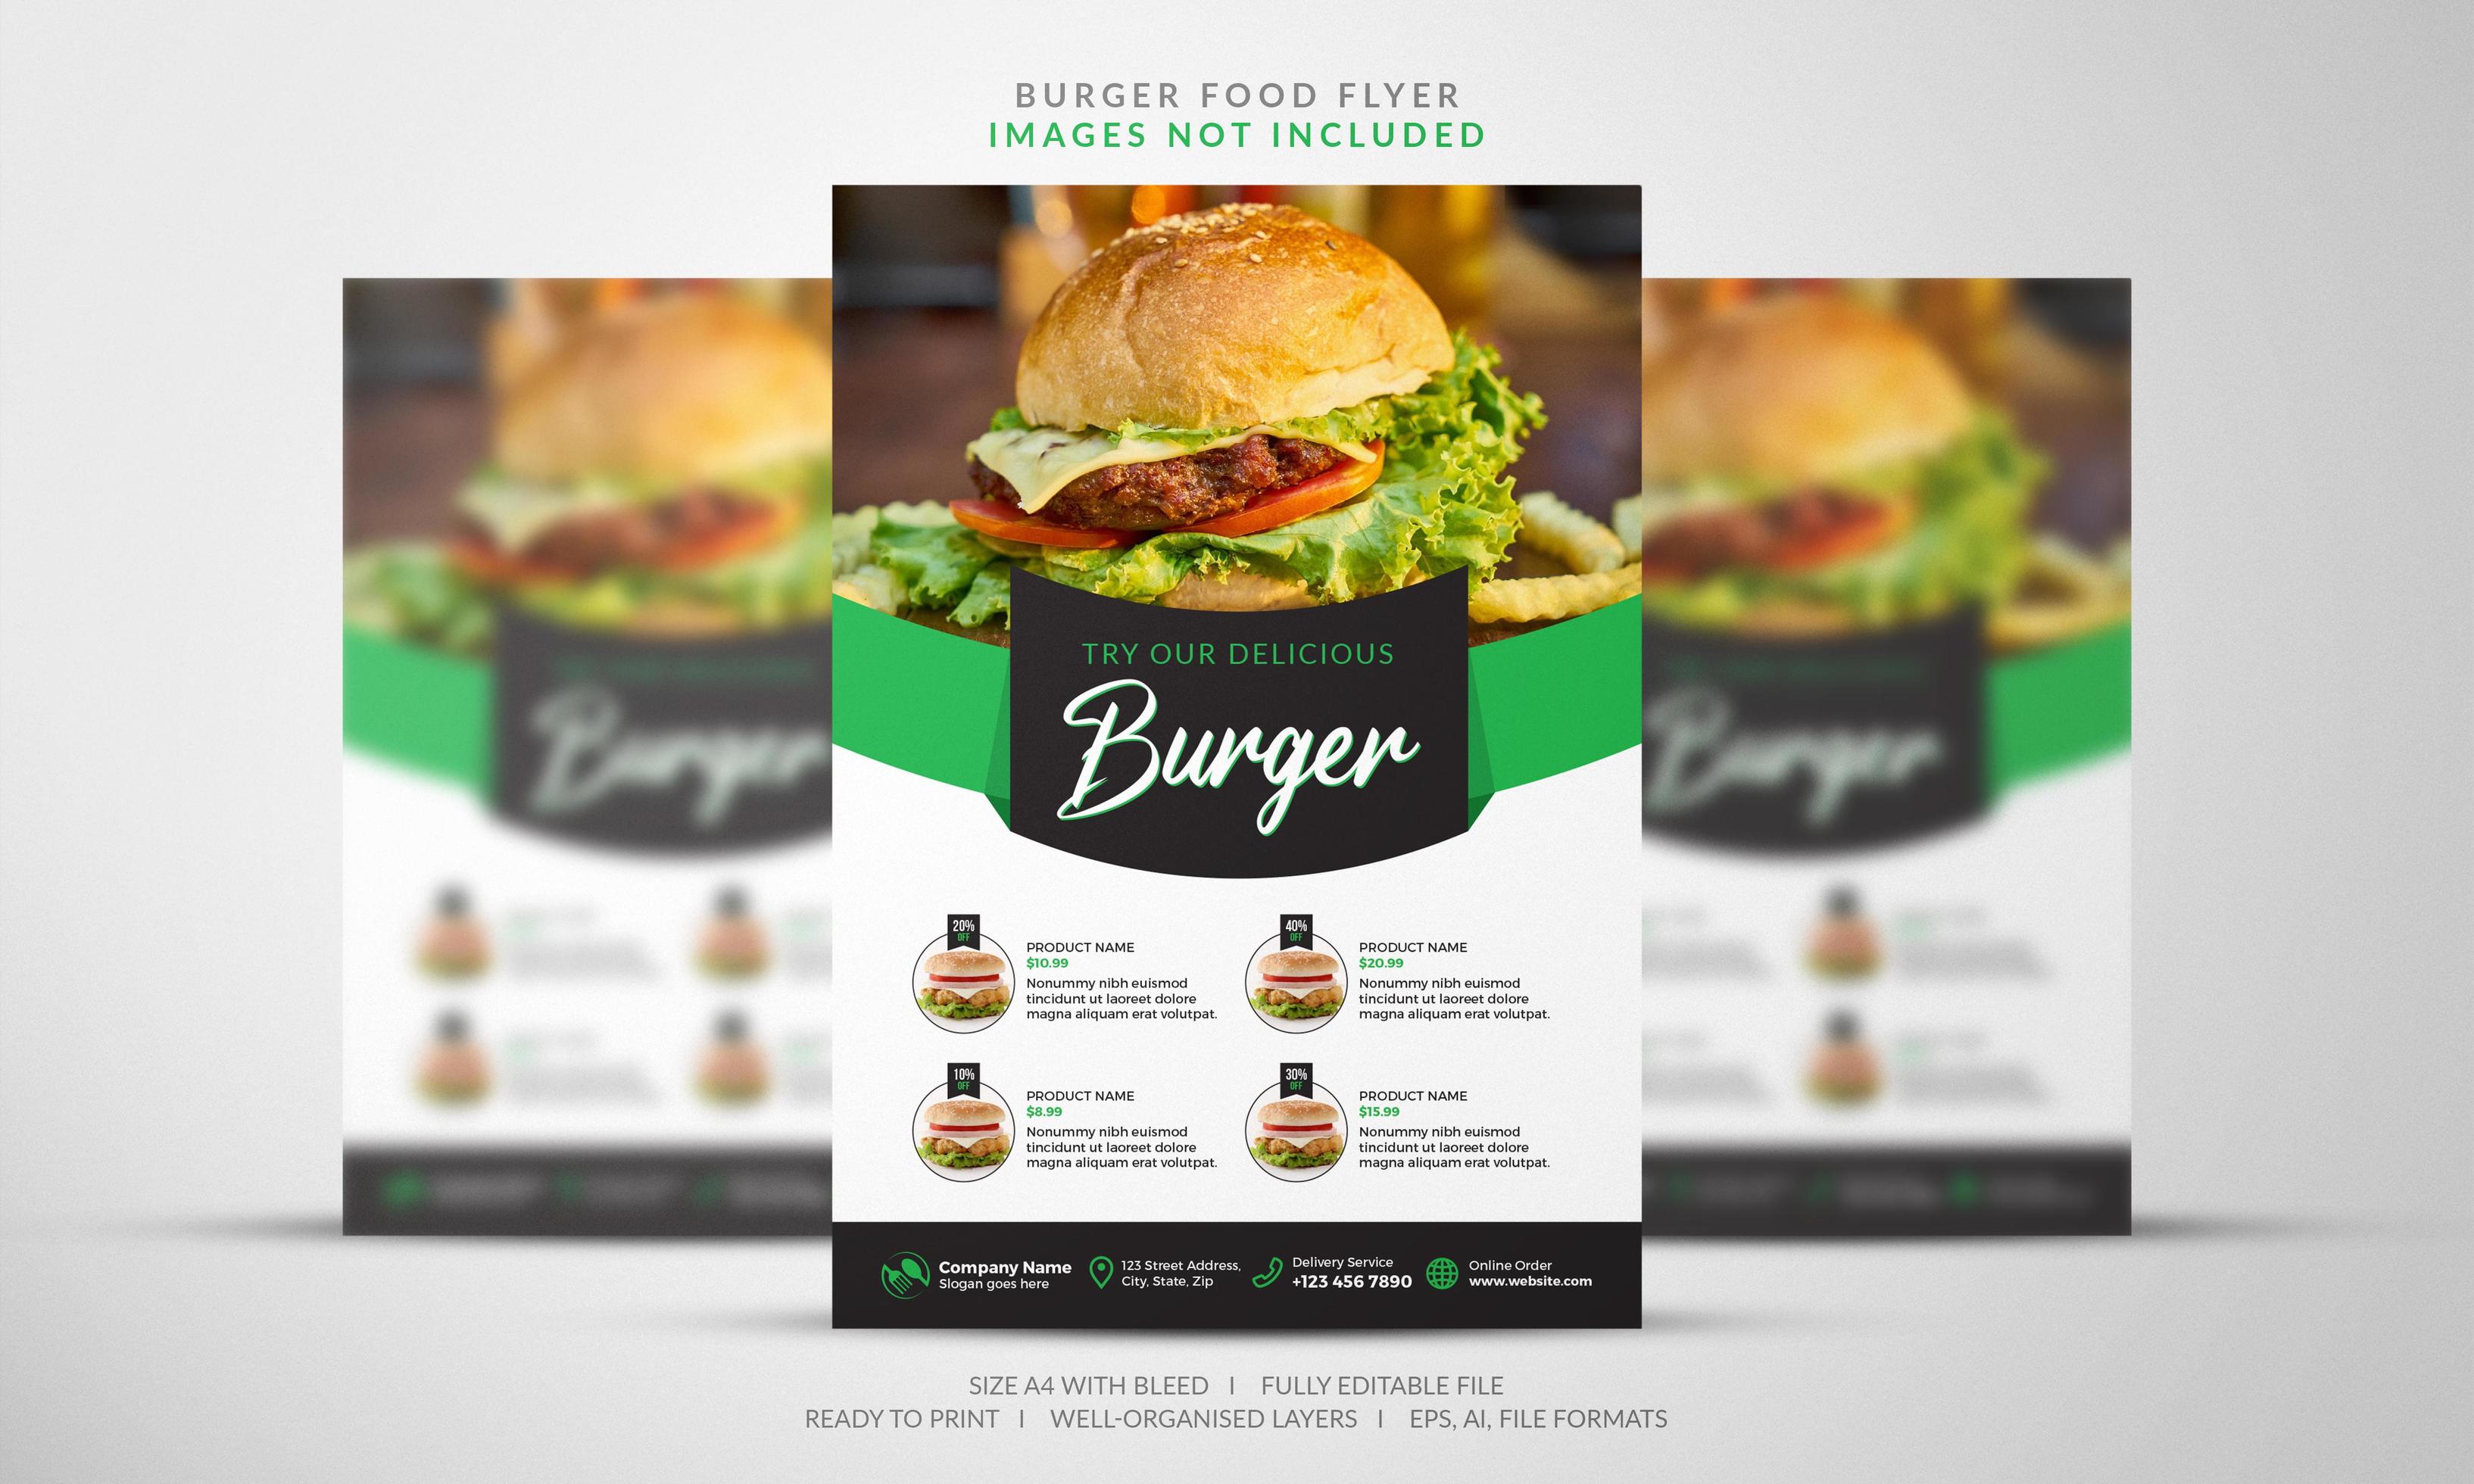 Burger flyer in green and black vector